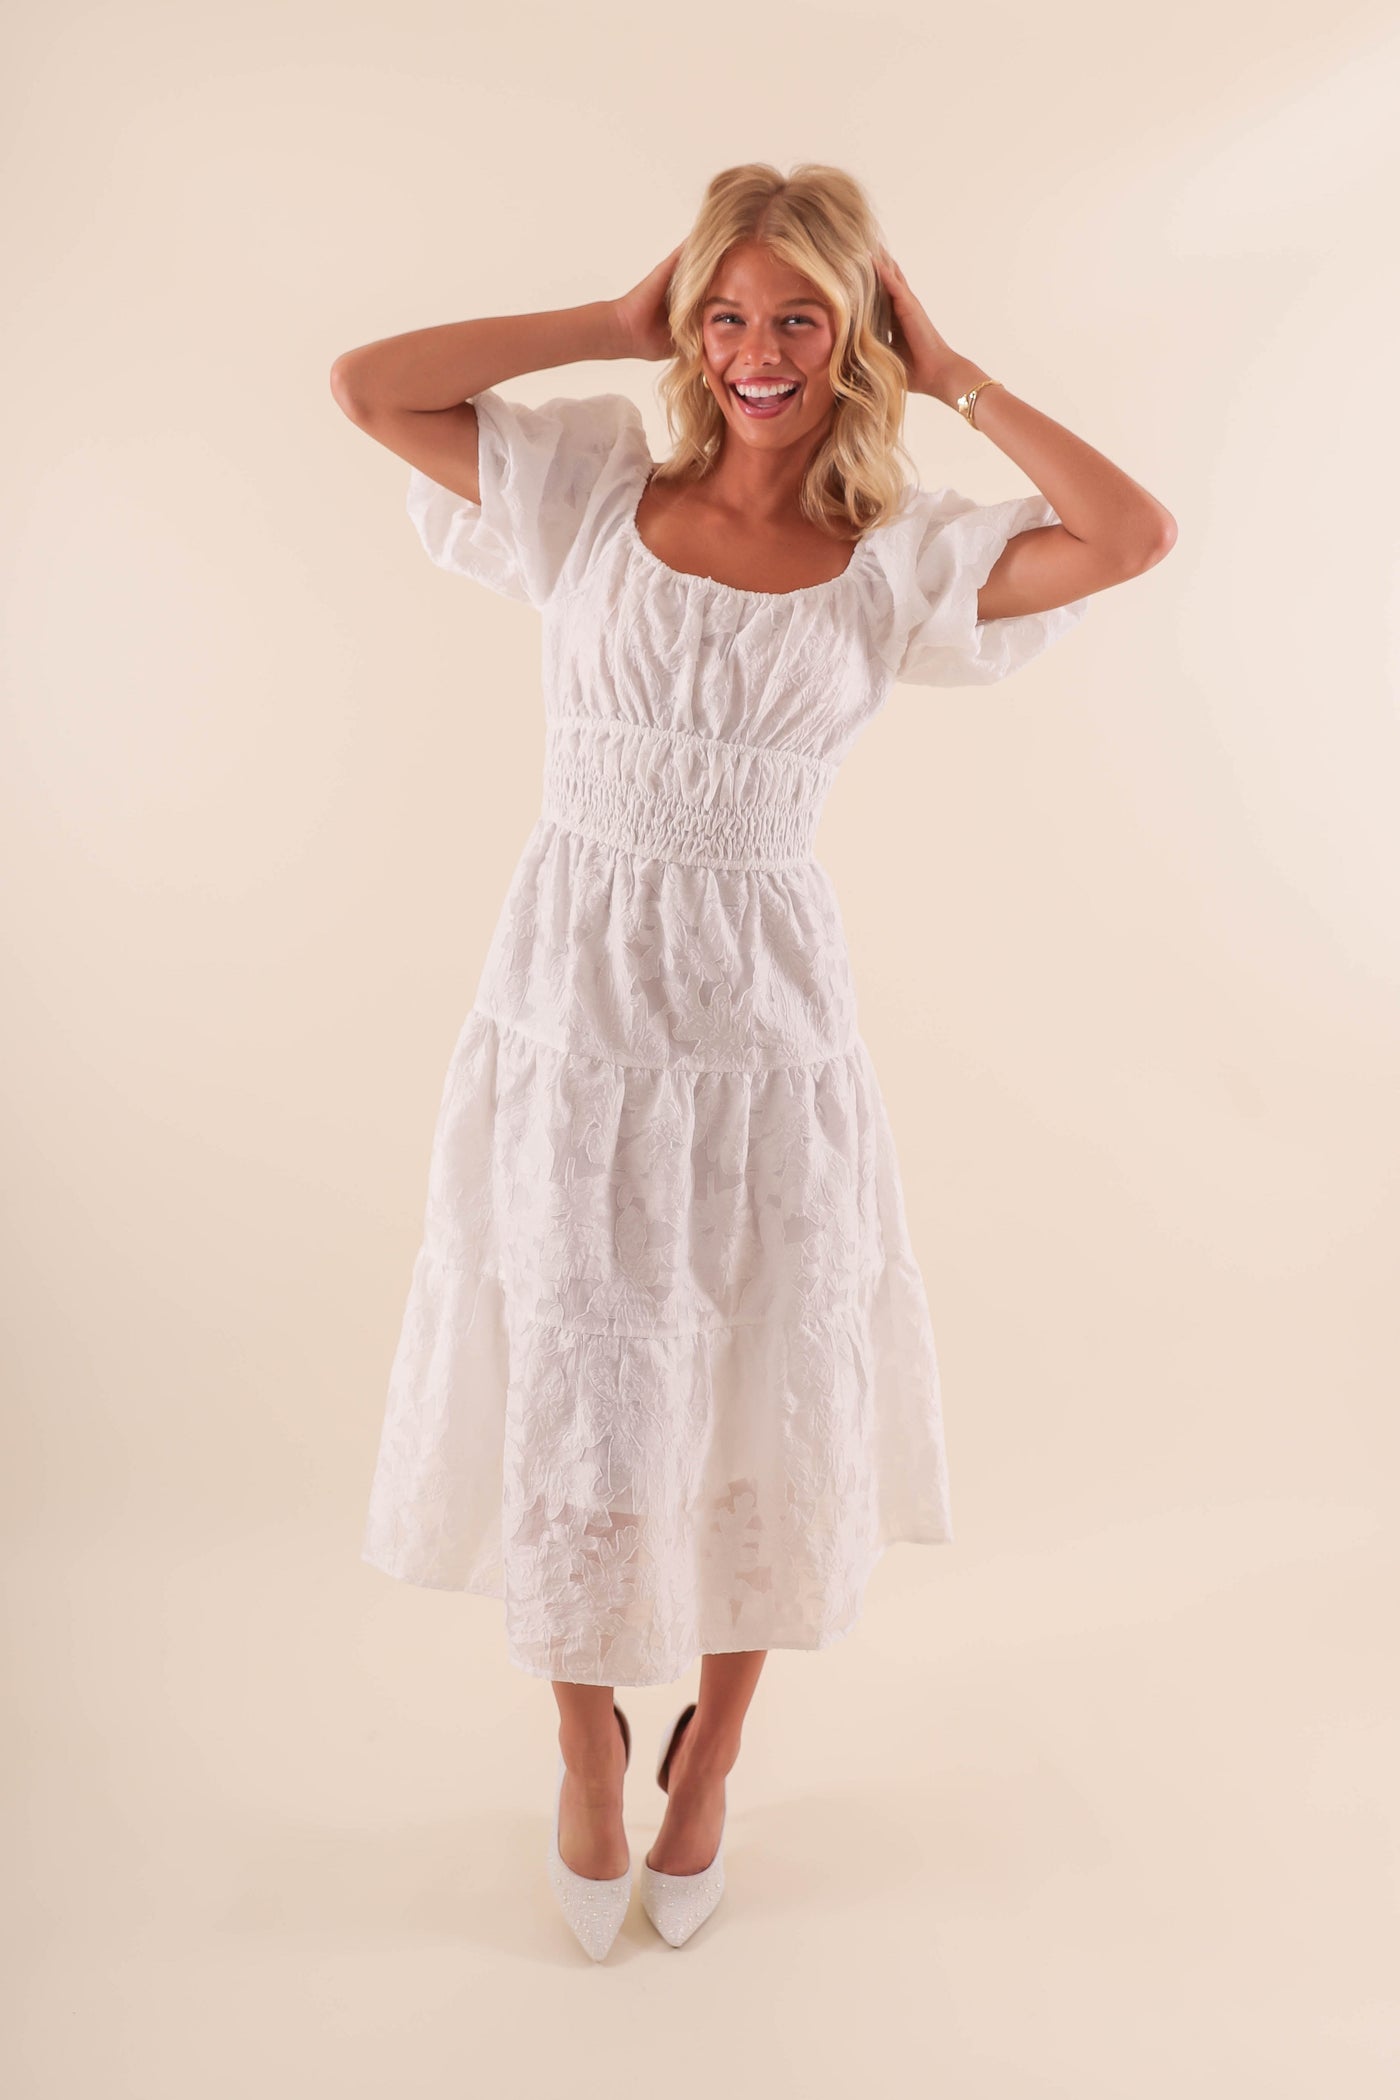 White Midi Dress with Balloon Sleeves - Classy White Lace Overlay Dress